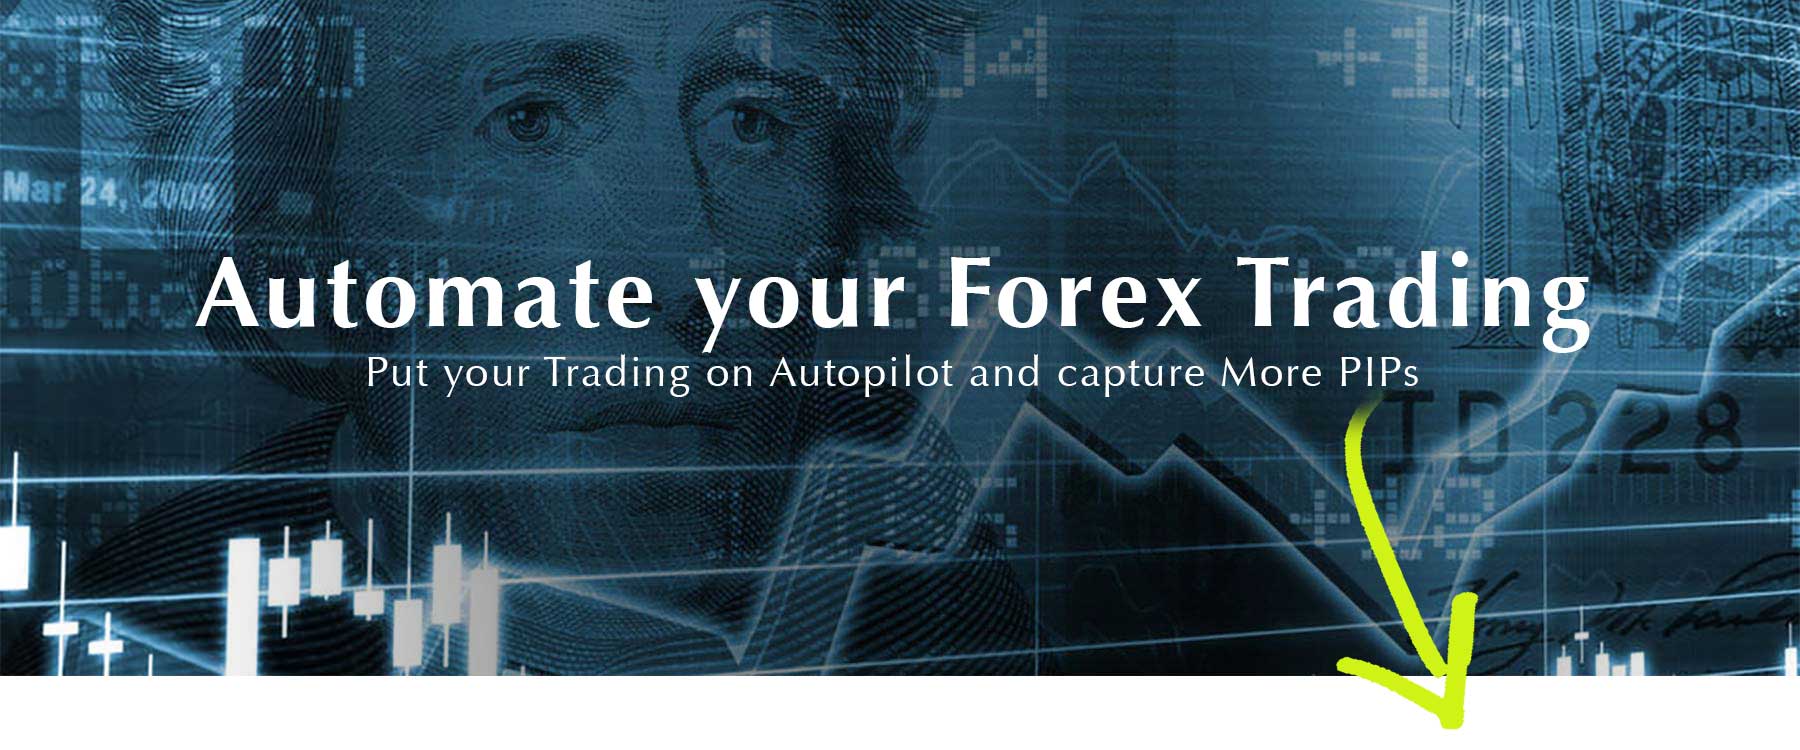 Forex how many trades a month